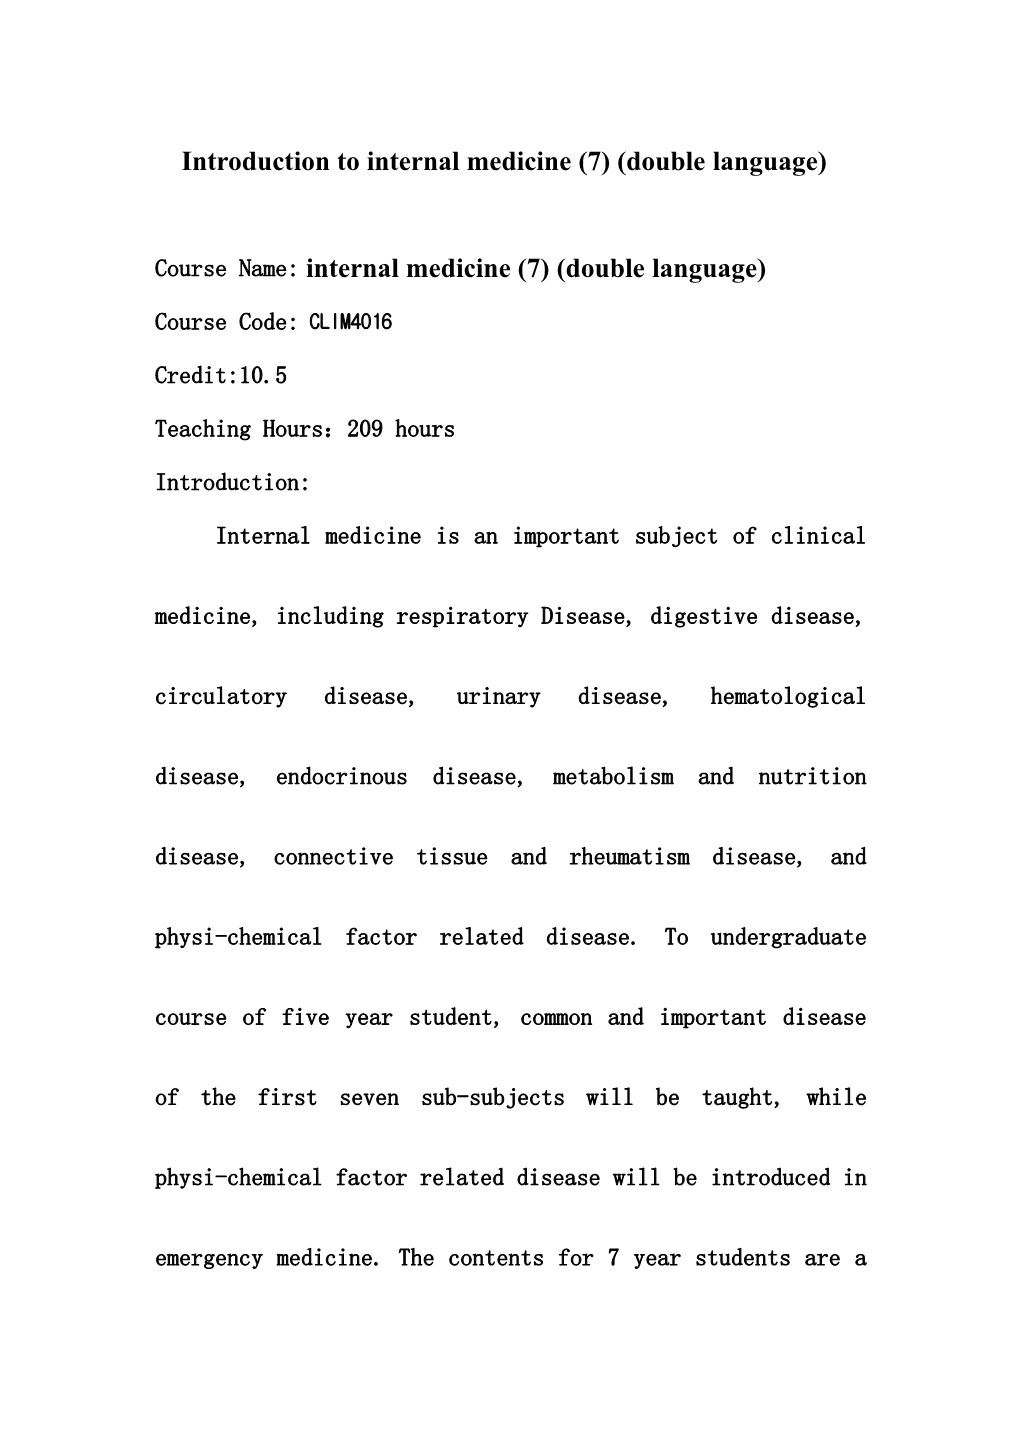 Introduction to Internal Medicine (7) (Double Language)